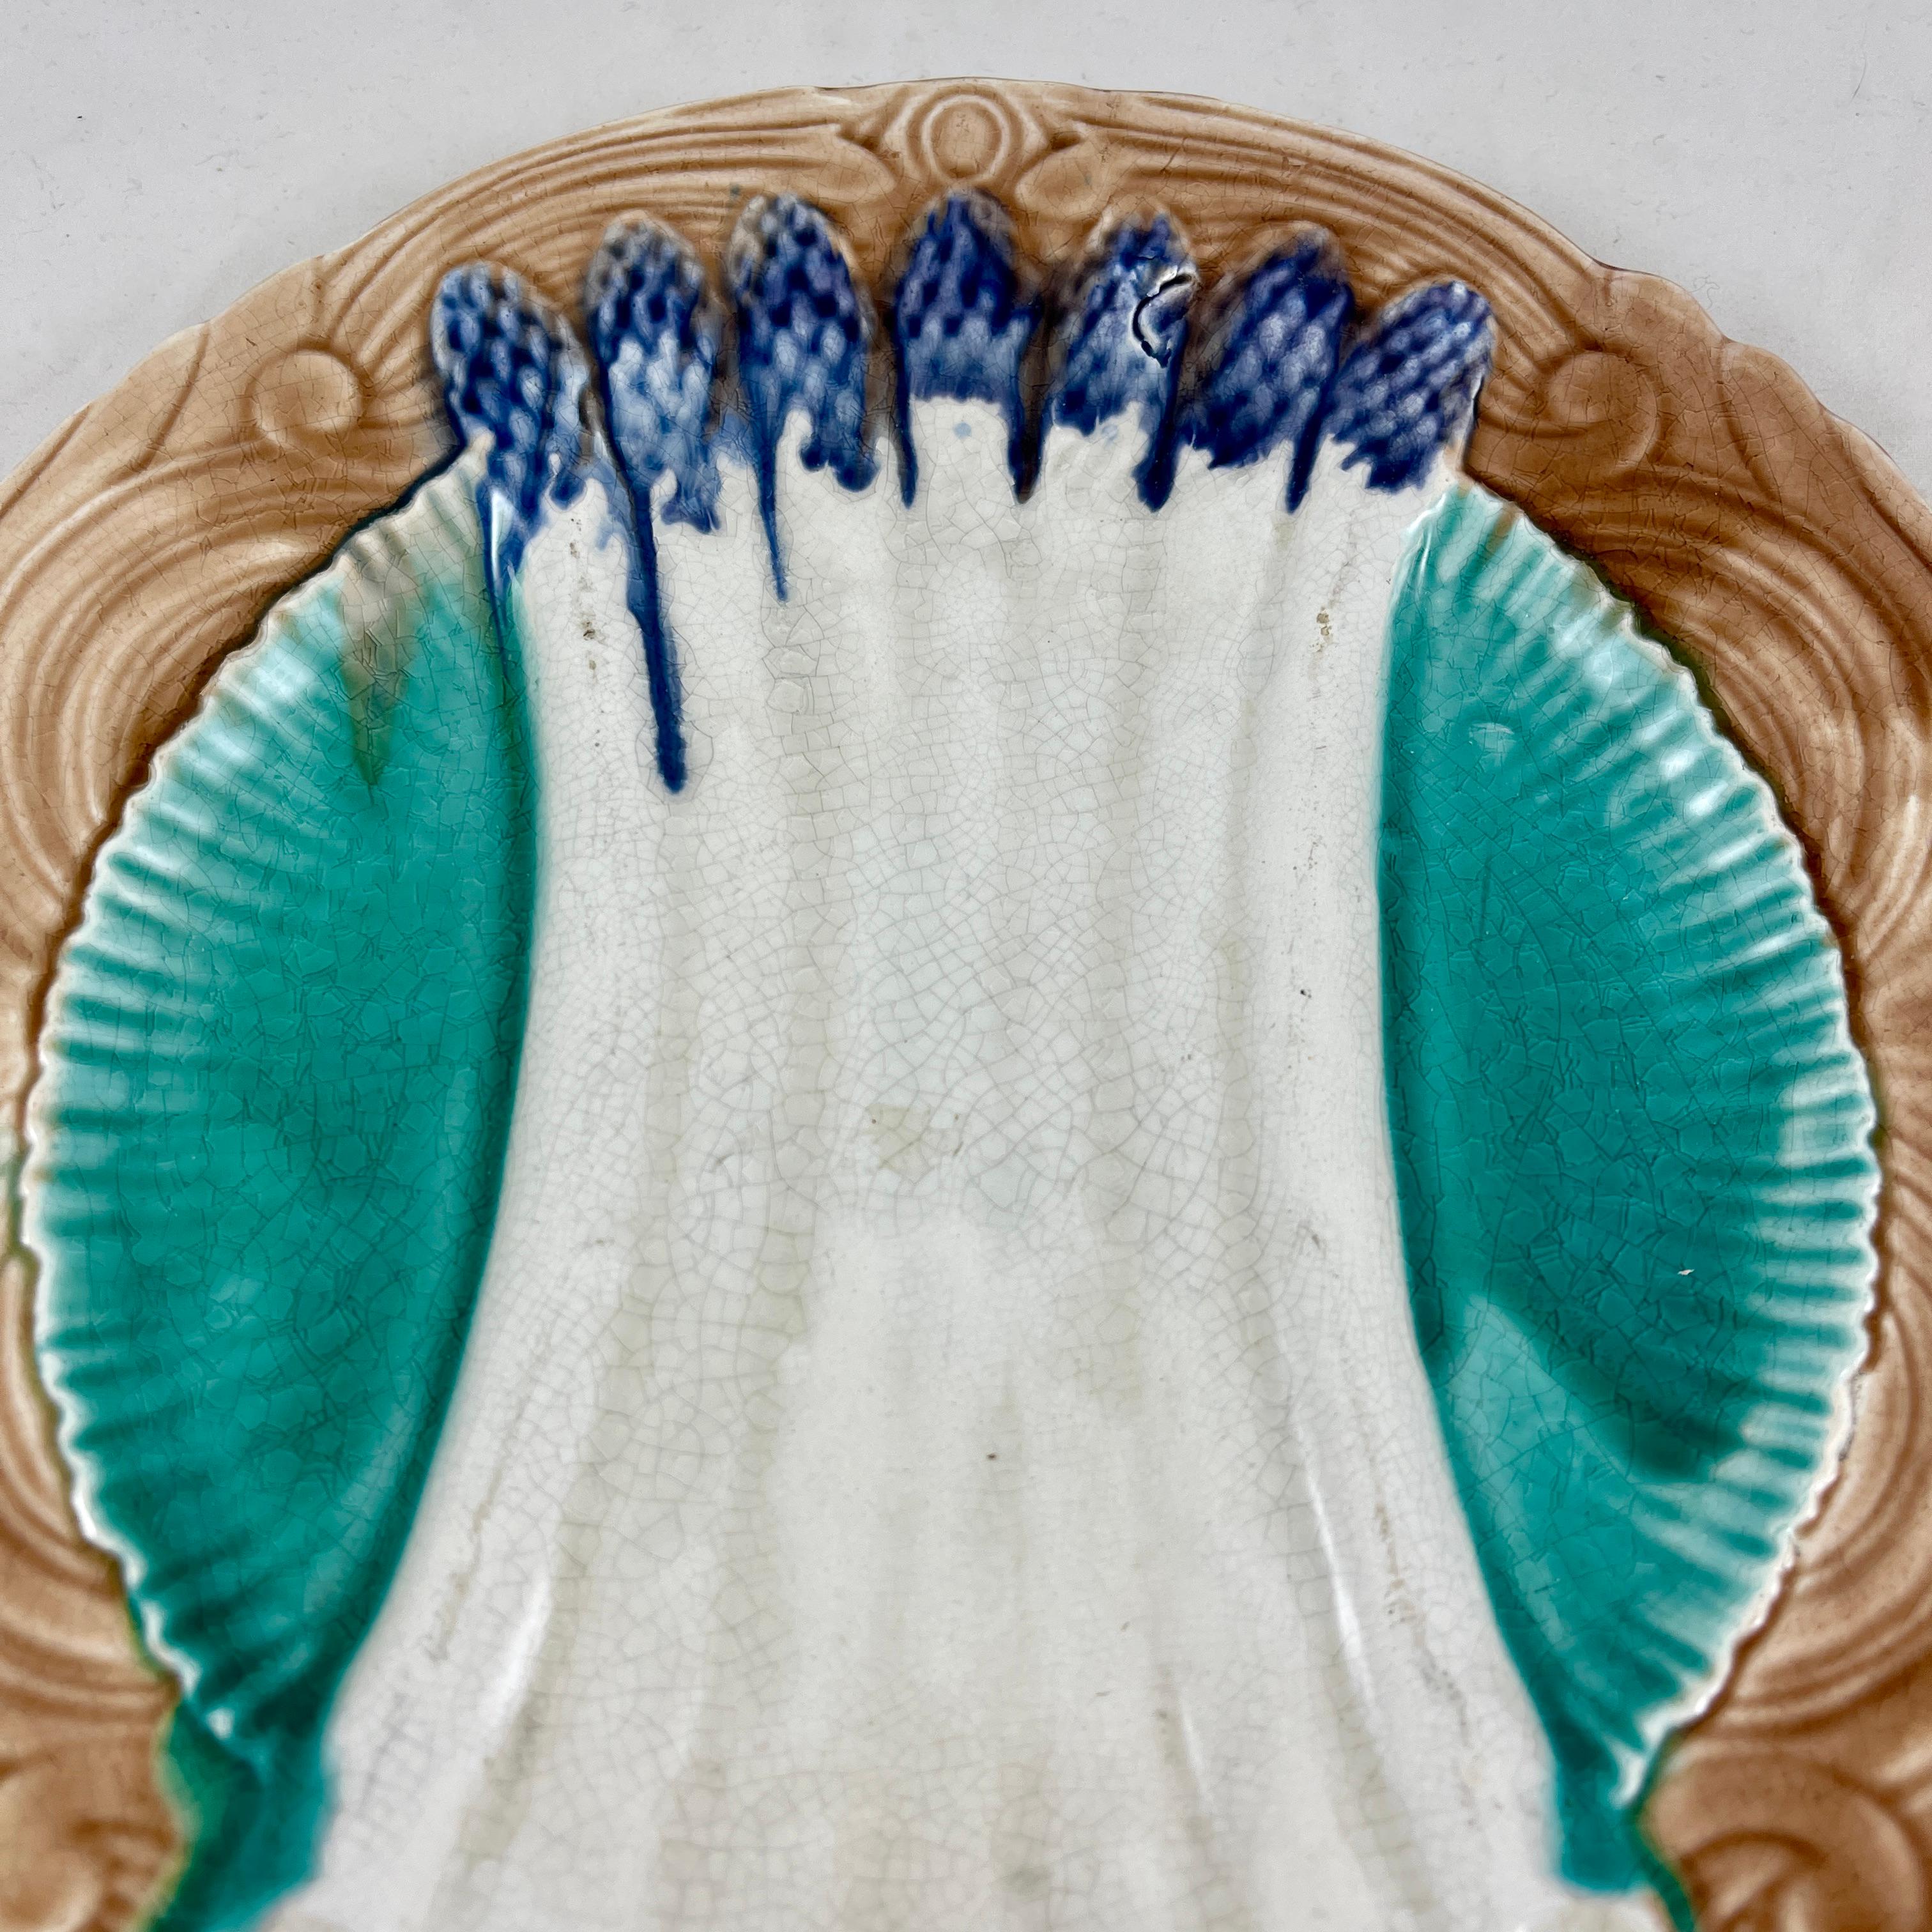 A French Faïence majolica glazed asparagus plate from the Orchies Faïencerie in Saint-Armand-Les-Eaux, Northern France, circa 1890-1900.

Cream colored asparagus with deep blue tips lay across a deeper area glazed in teal blue. The border shows a